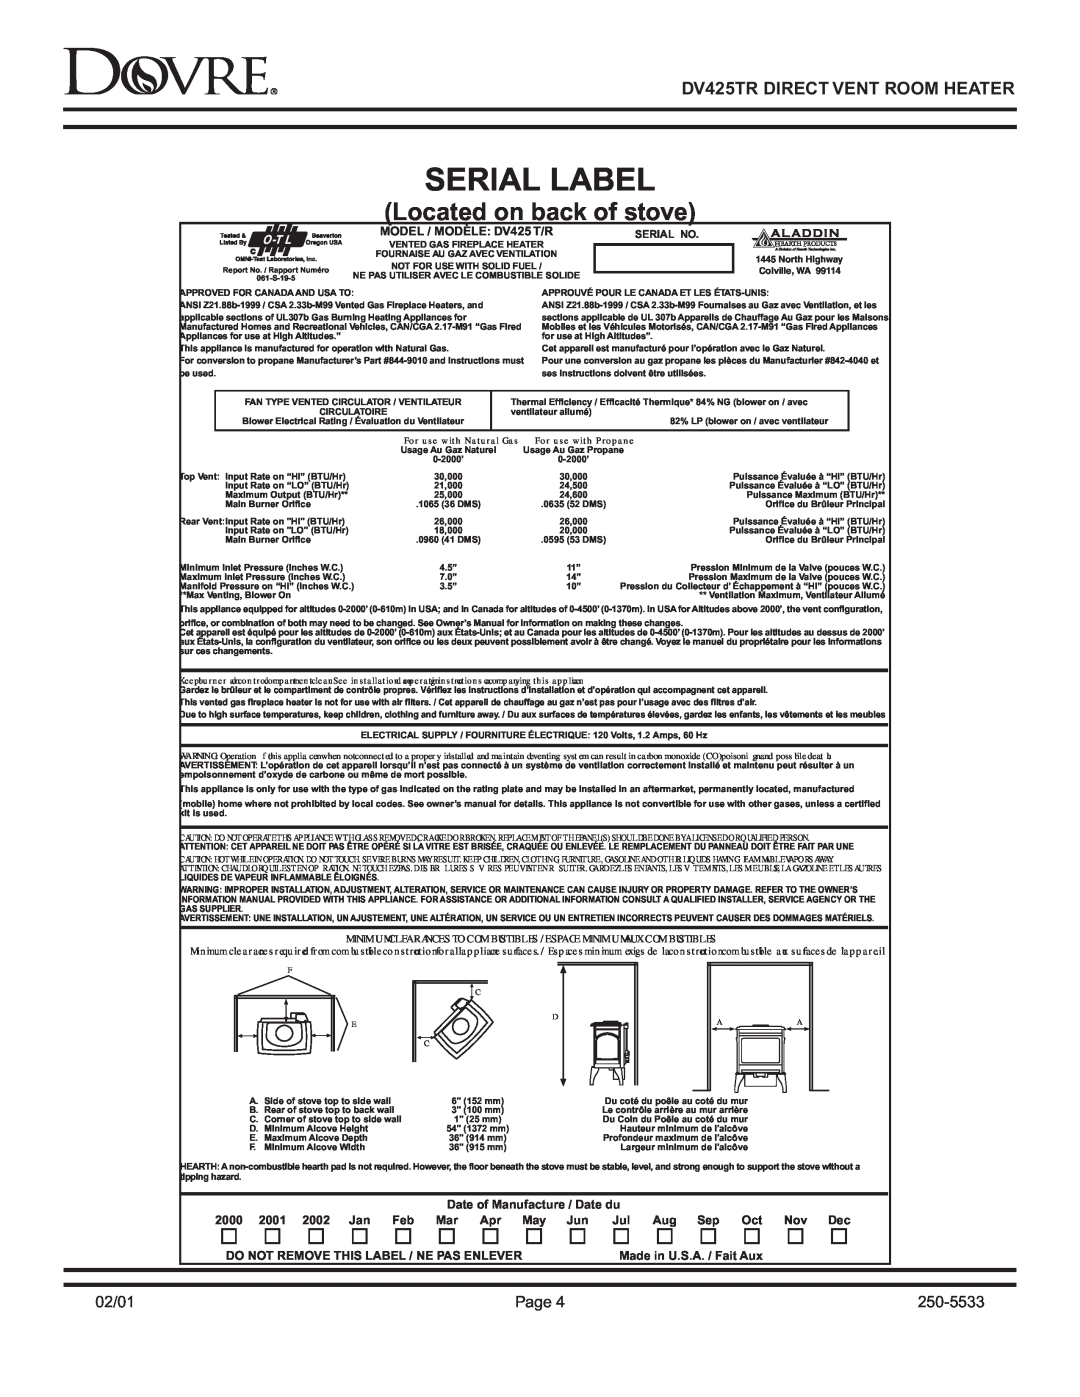 Sapphire Audio DV425TR owner manual Serial Label, Located on back of stove, 02/01, Page, 250-5533 